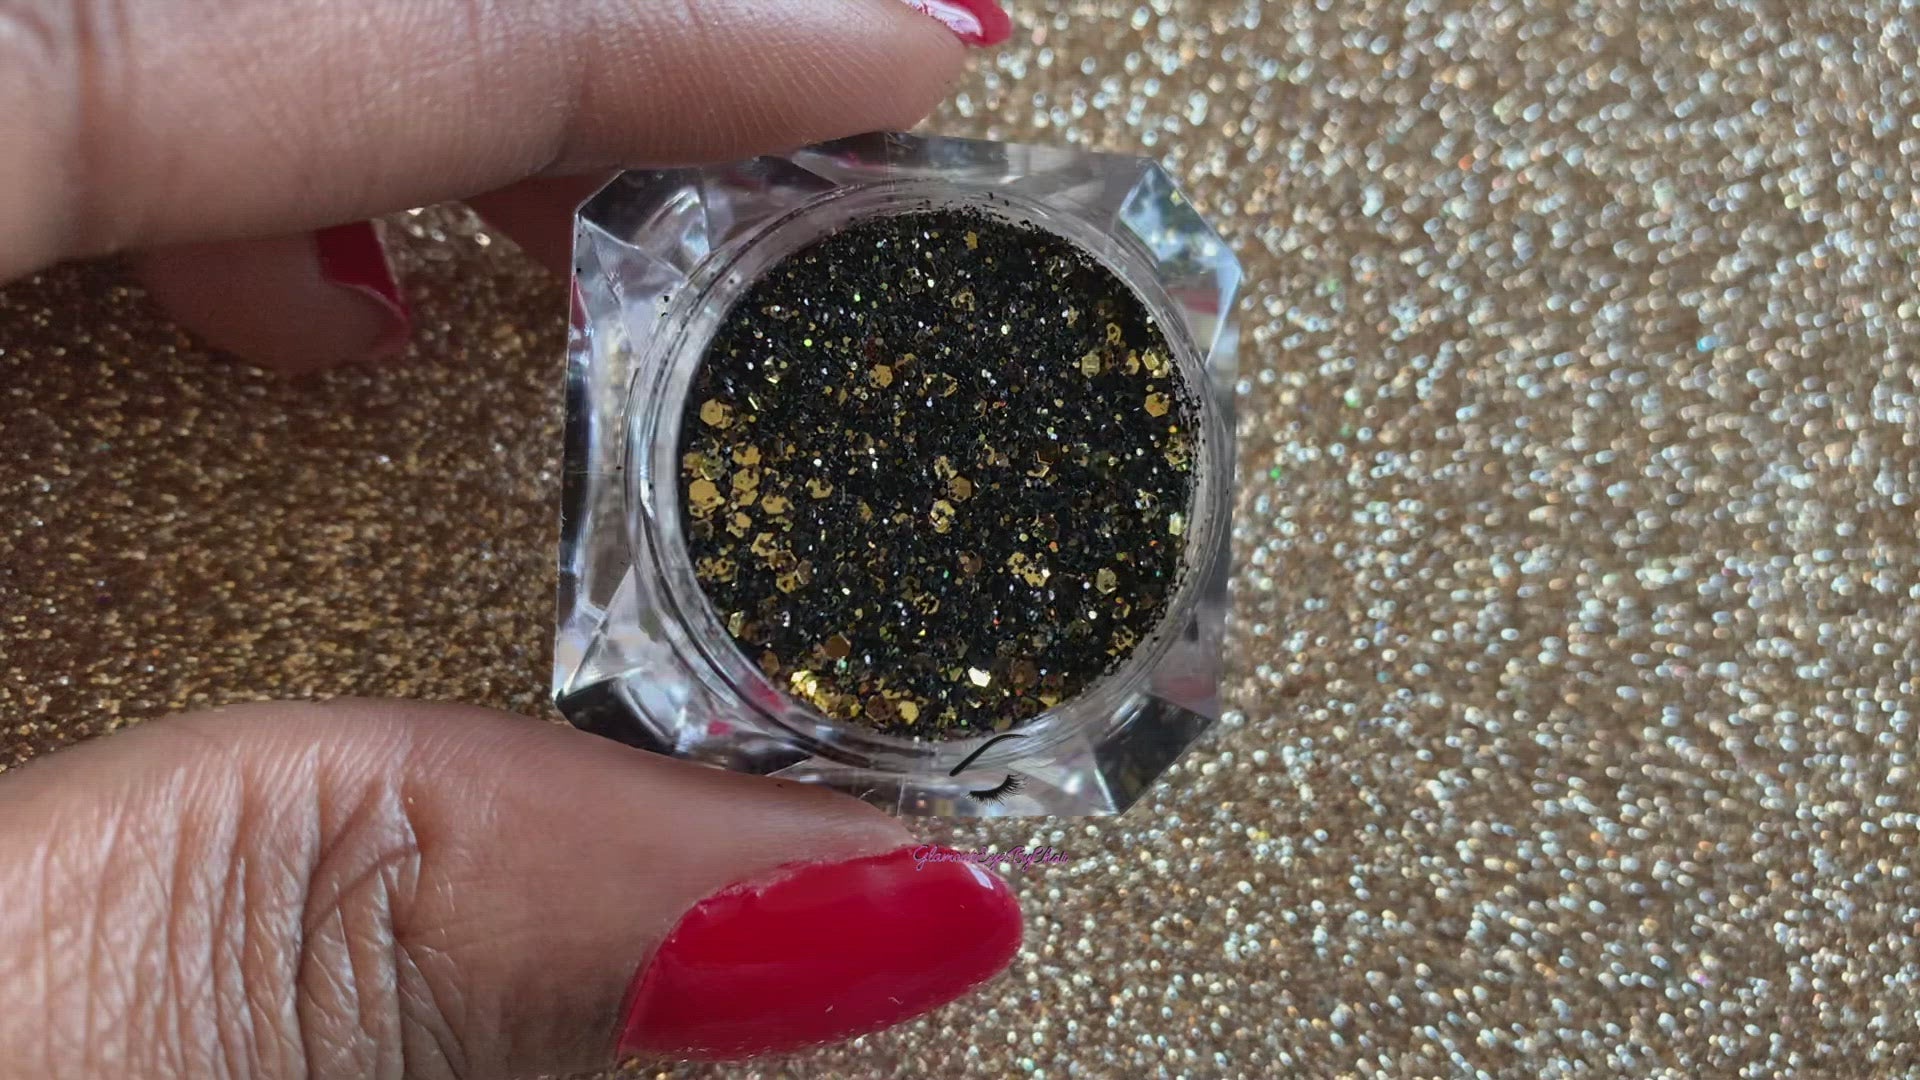 This glitter is called Elegance and is part of the chunky glitter collection. It consists of black and gold glitter with a holographic sparkle. Elegance can be used for your face, body, hair and nails. Comes in 5g jars only.